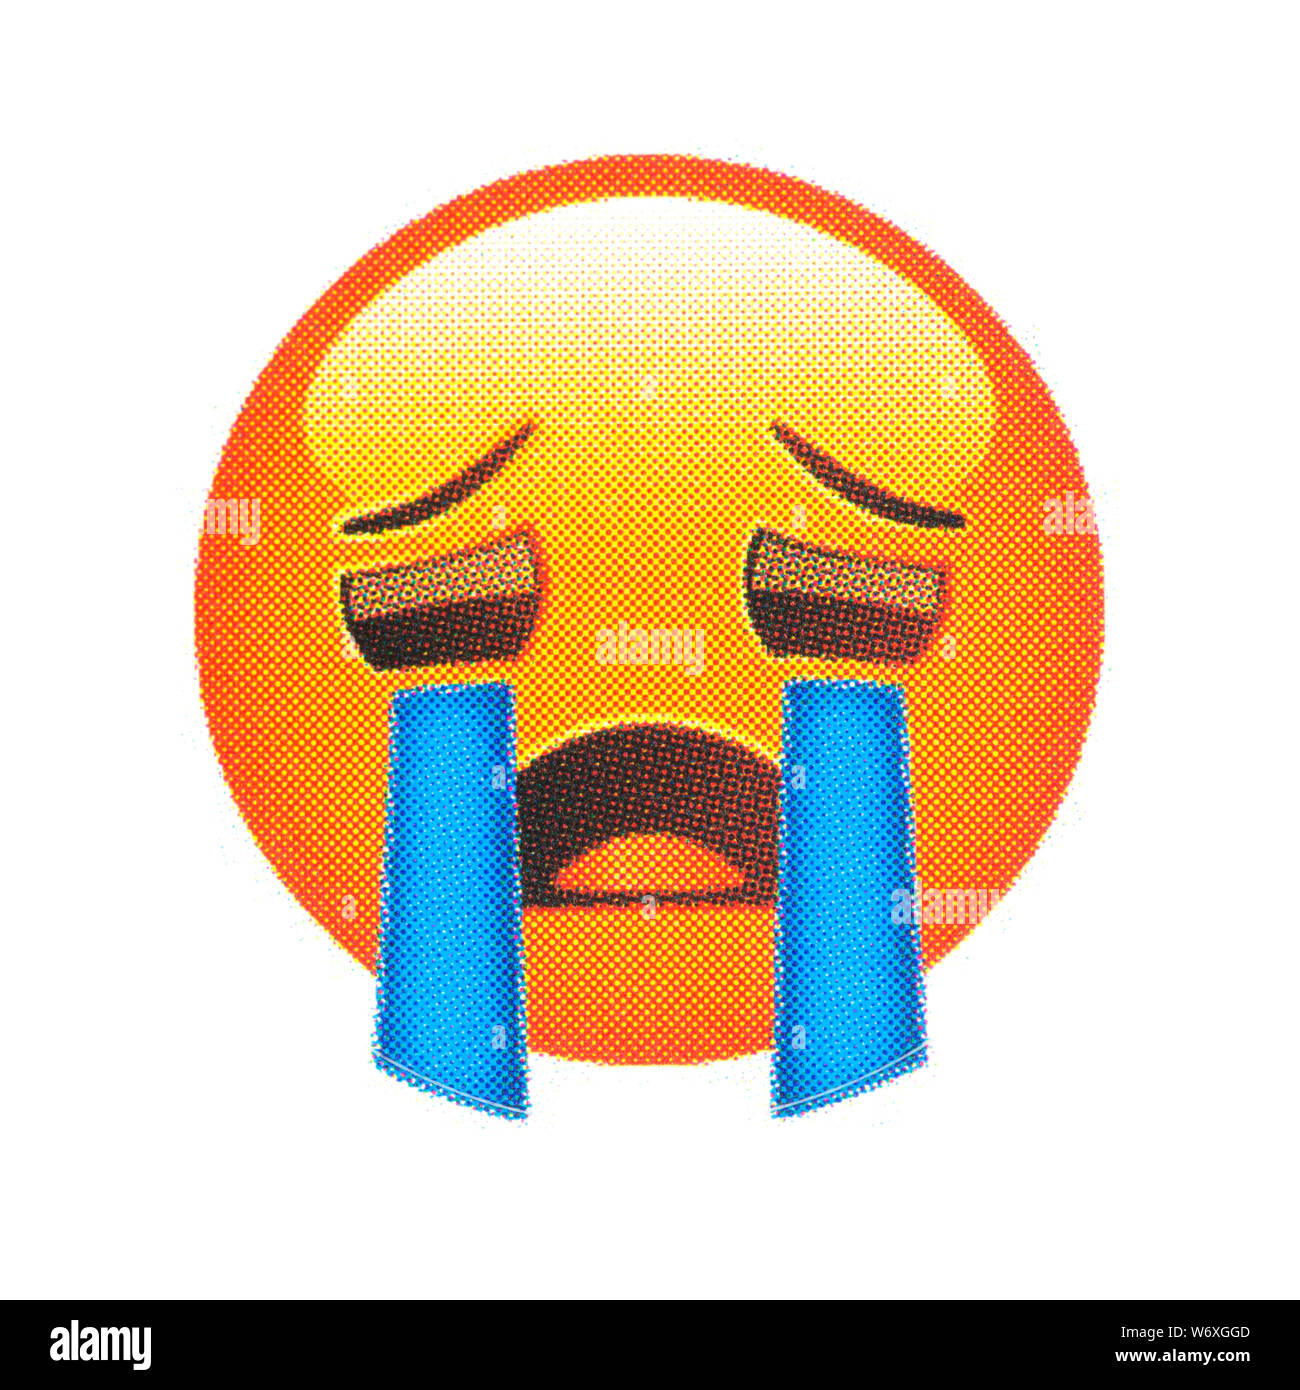 Loudly crying face emoticon Stock Photo